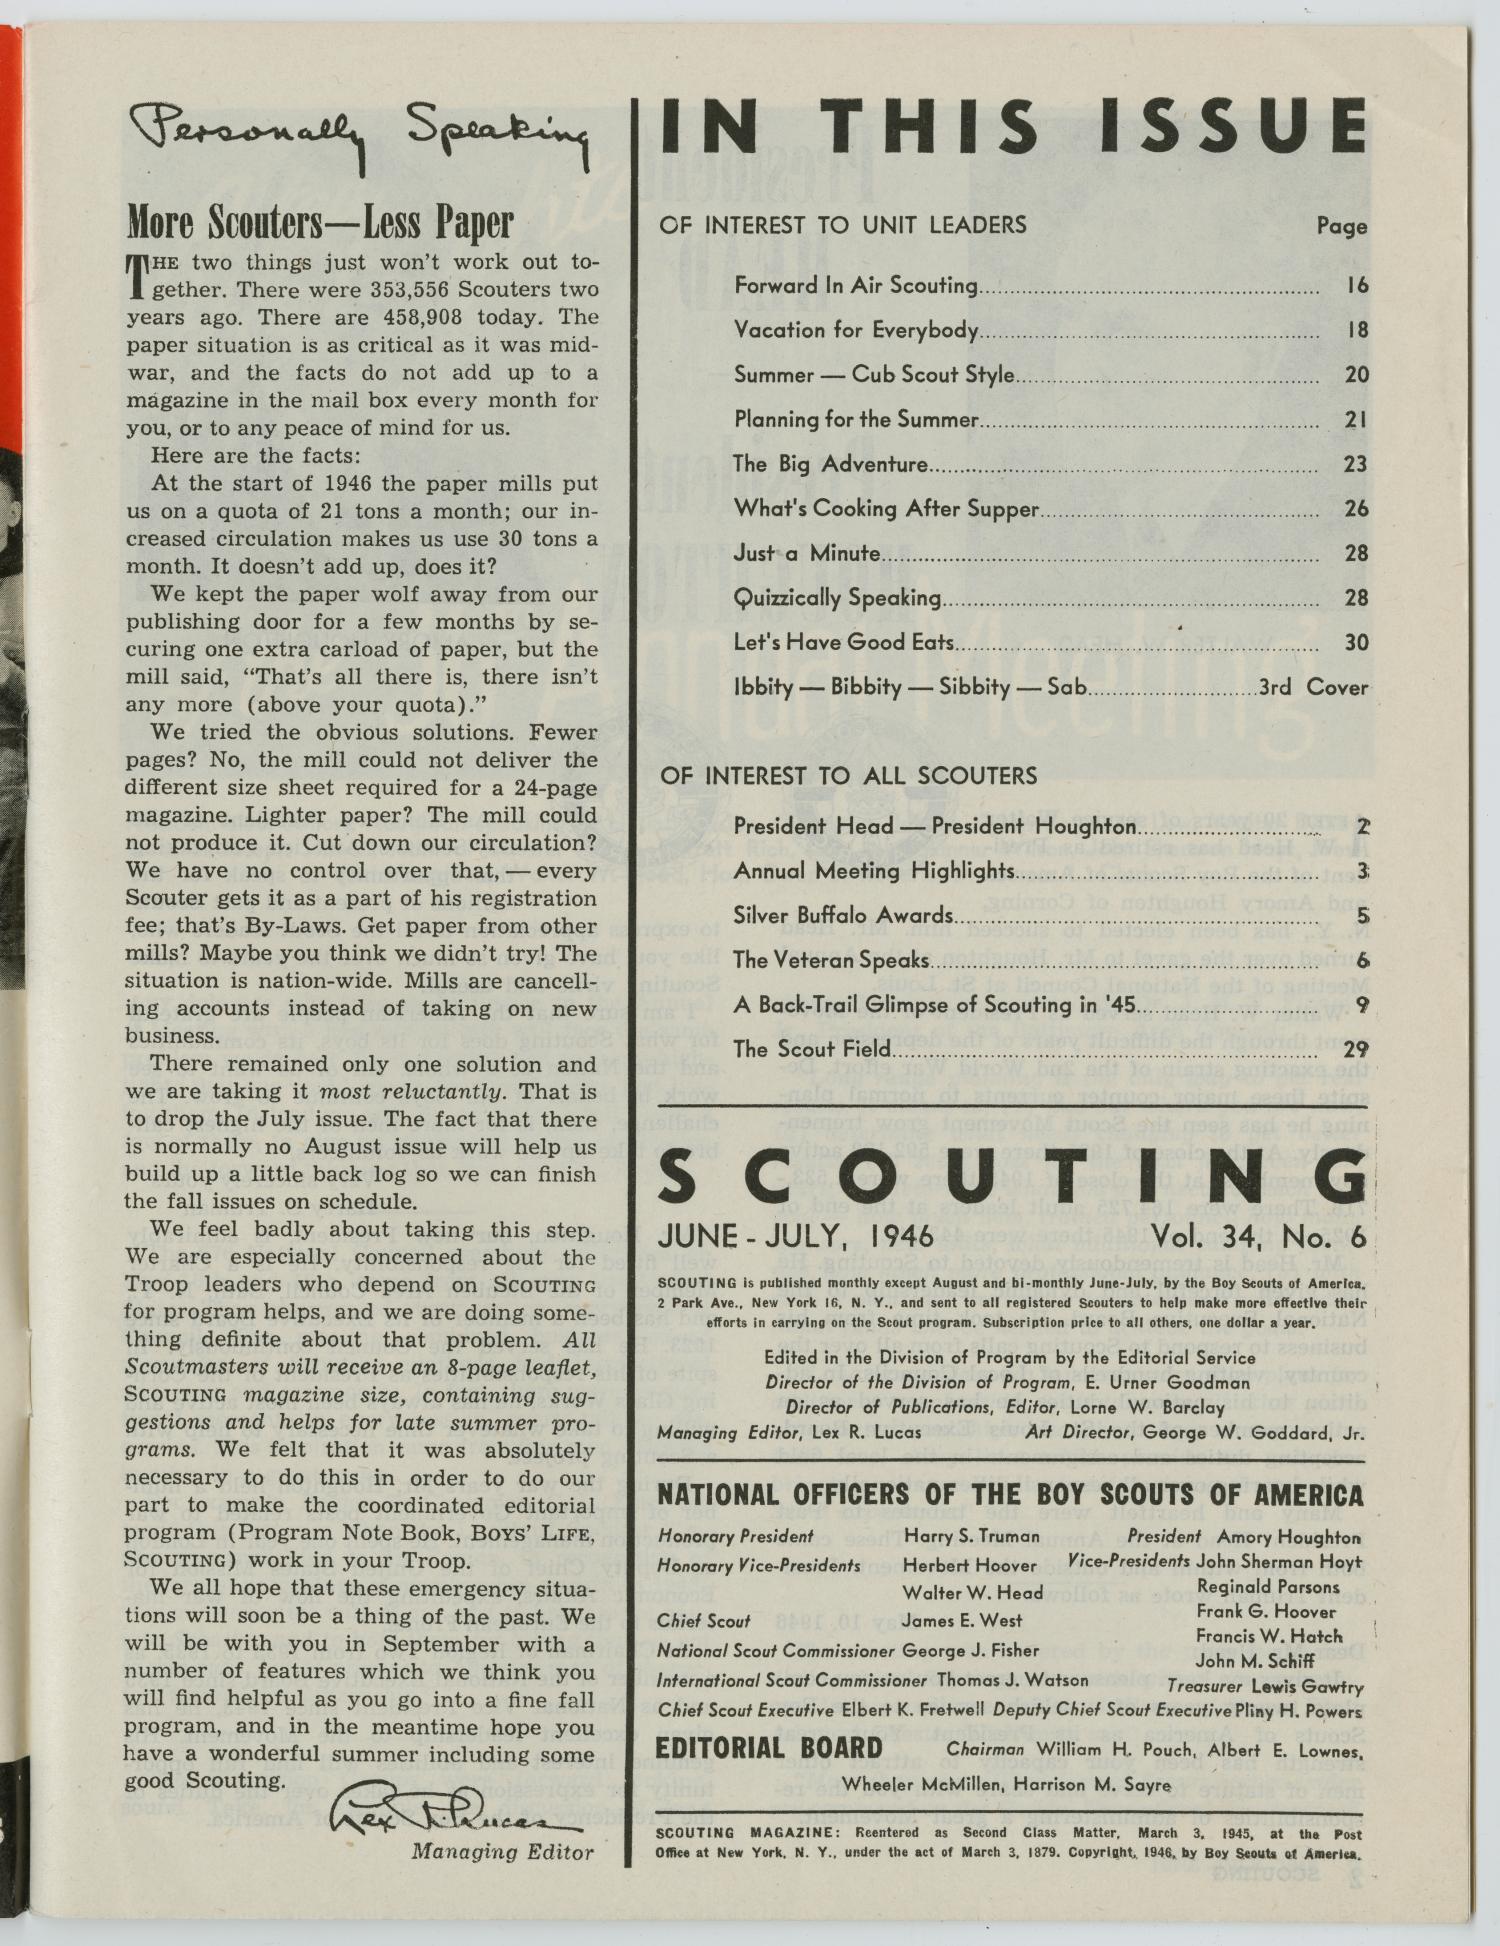 Scouting, Volume 34, Number 6, June-July 1946
                                                
                                                    1
                                                